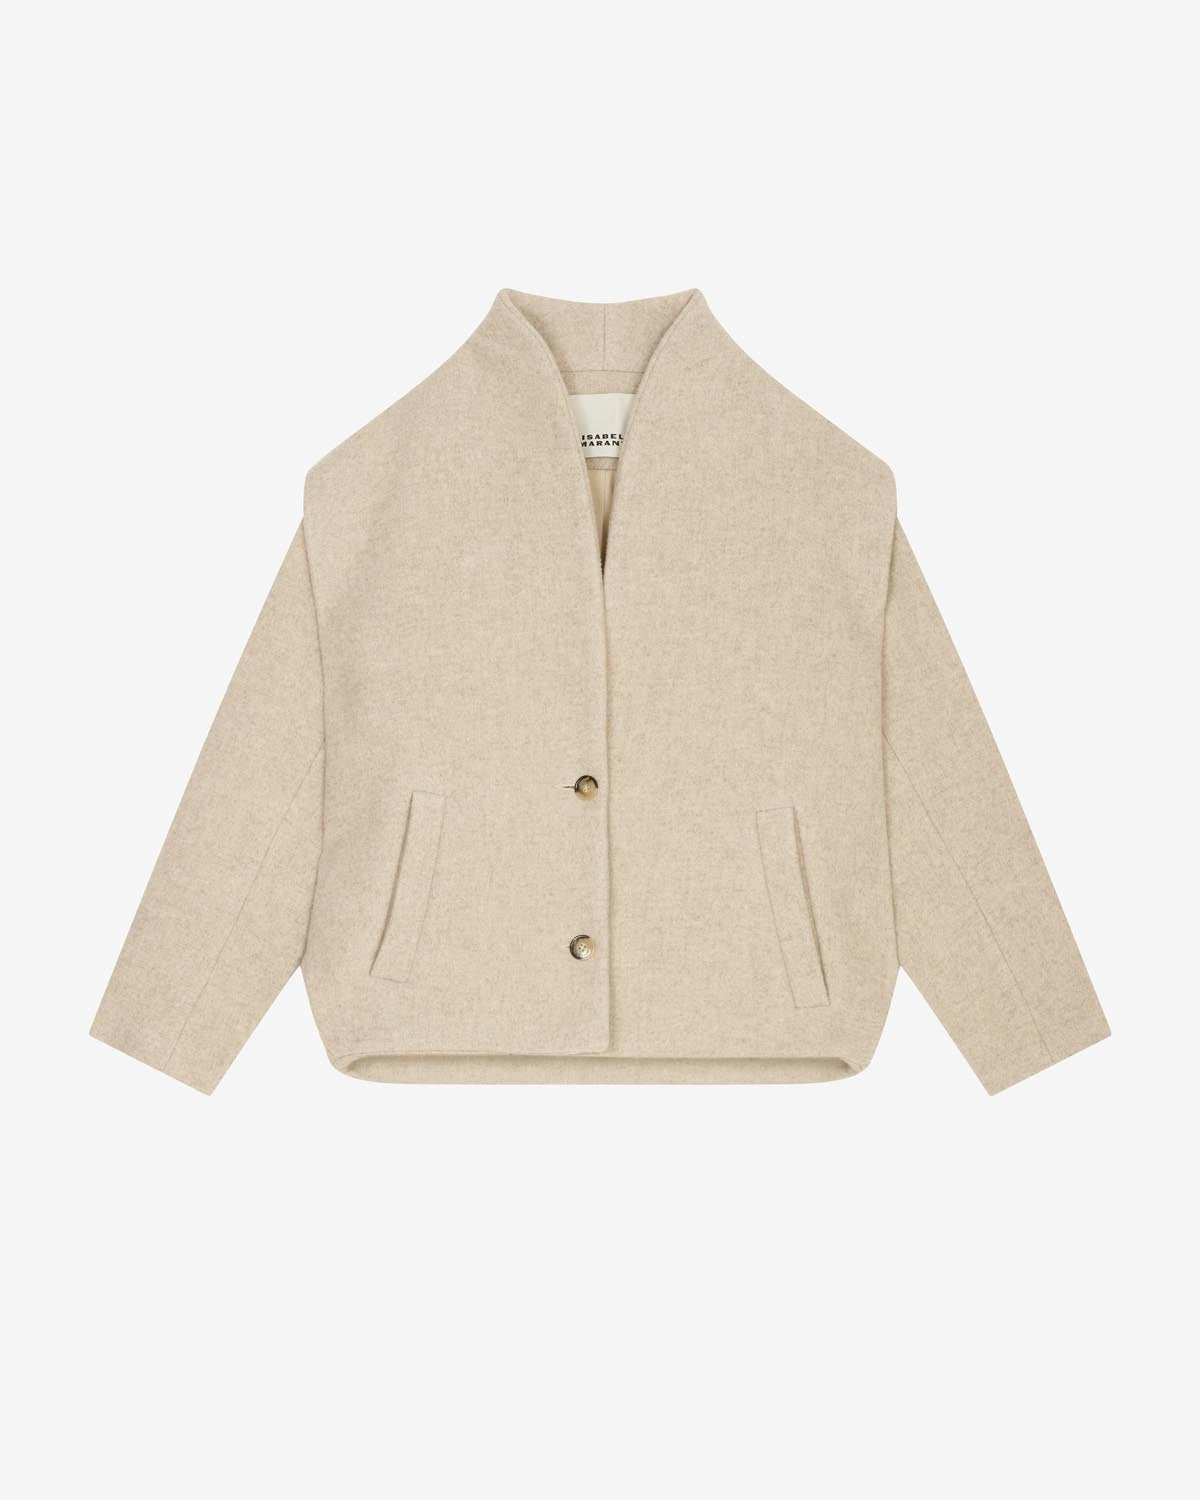 Coats and Jackets Woman | ISABEL MARANT Official Online Store